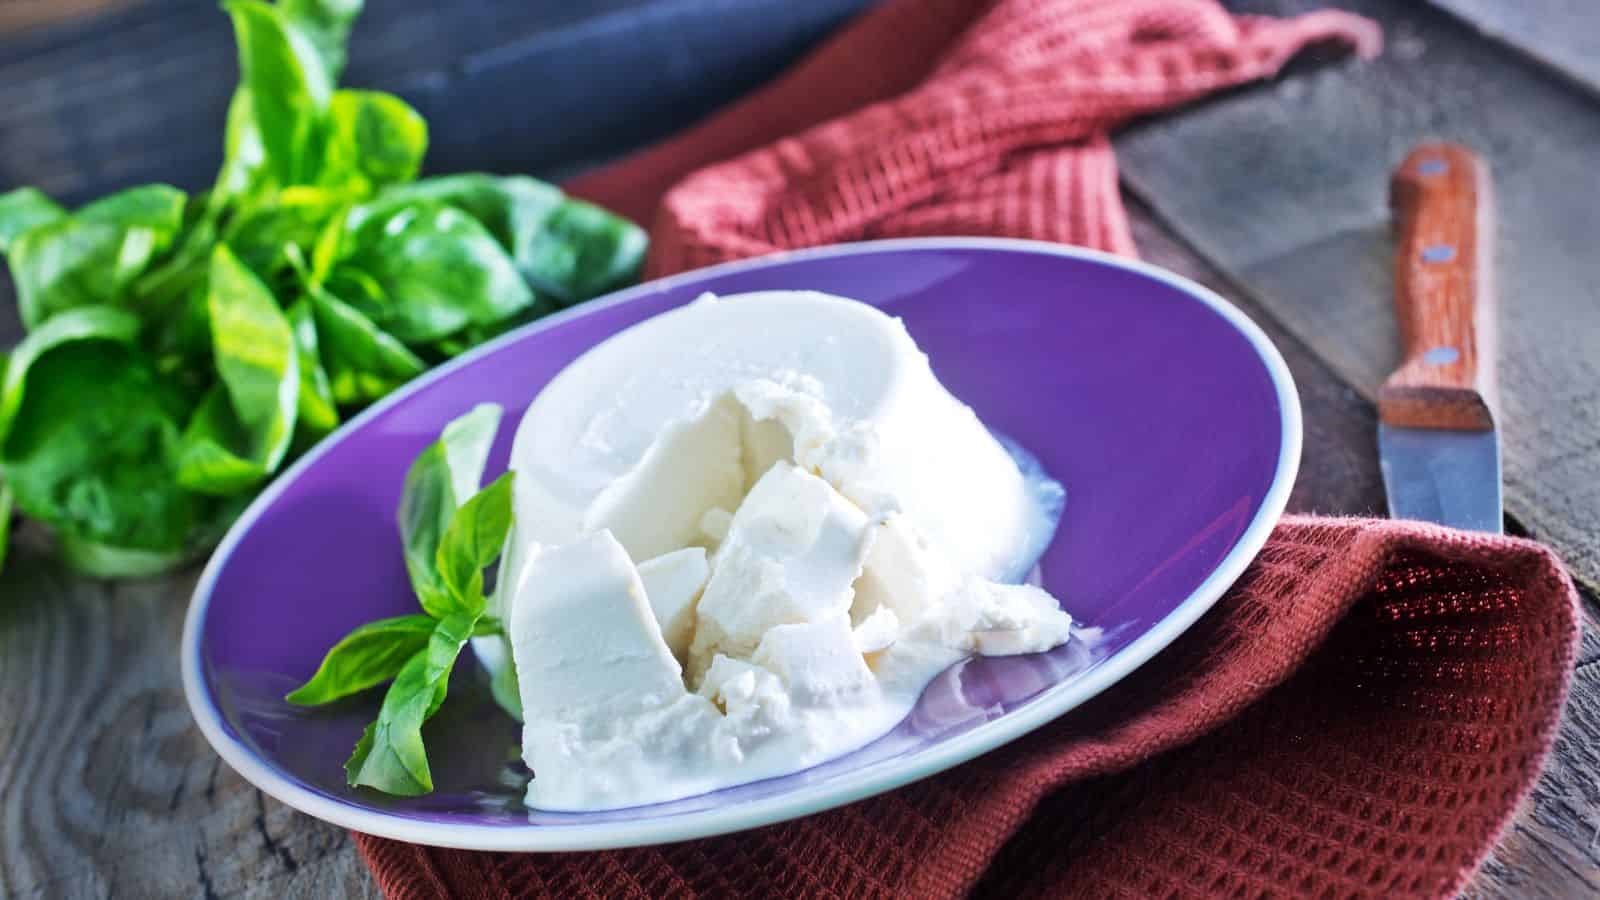 Fresh ricotta with basil on the plate.